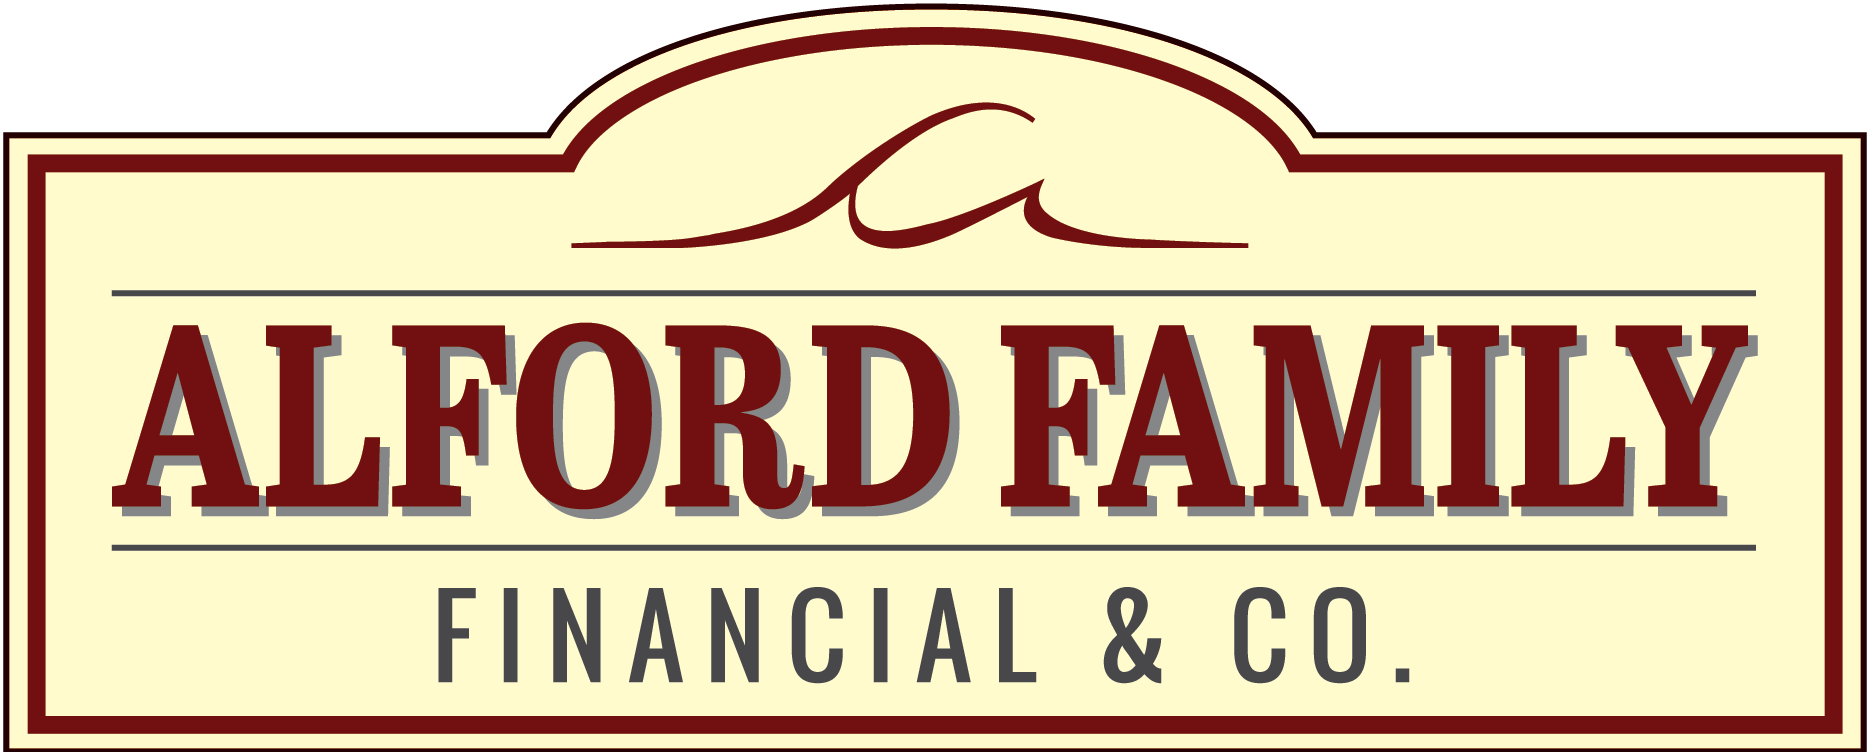 ALFORD FAMILY FINANCIAL &CO